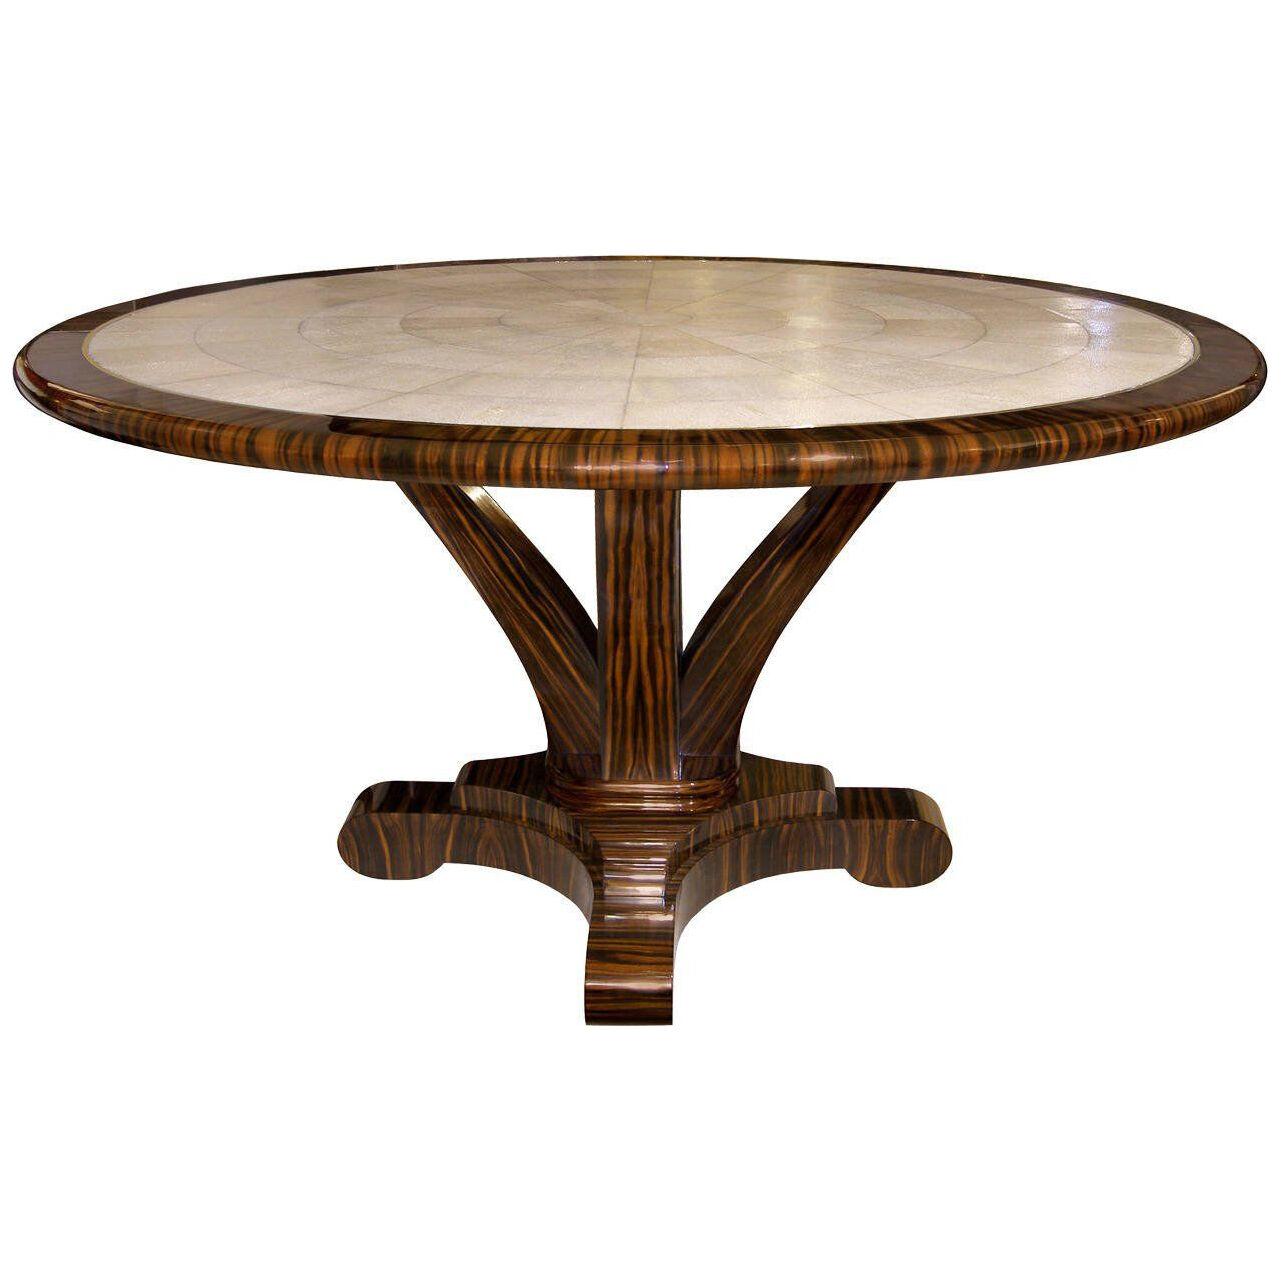 Delfine Macassar Ebony and Shagreen Table with Brass by Craig Van Den Brulle